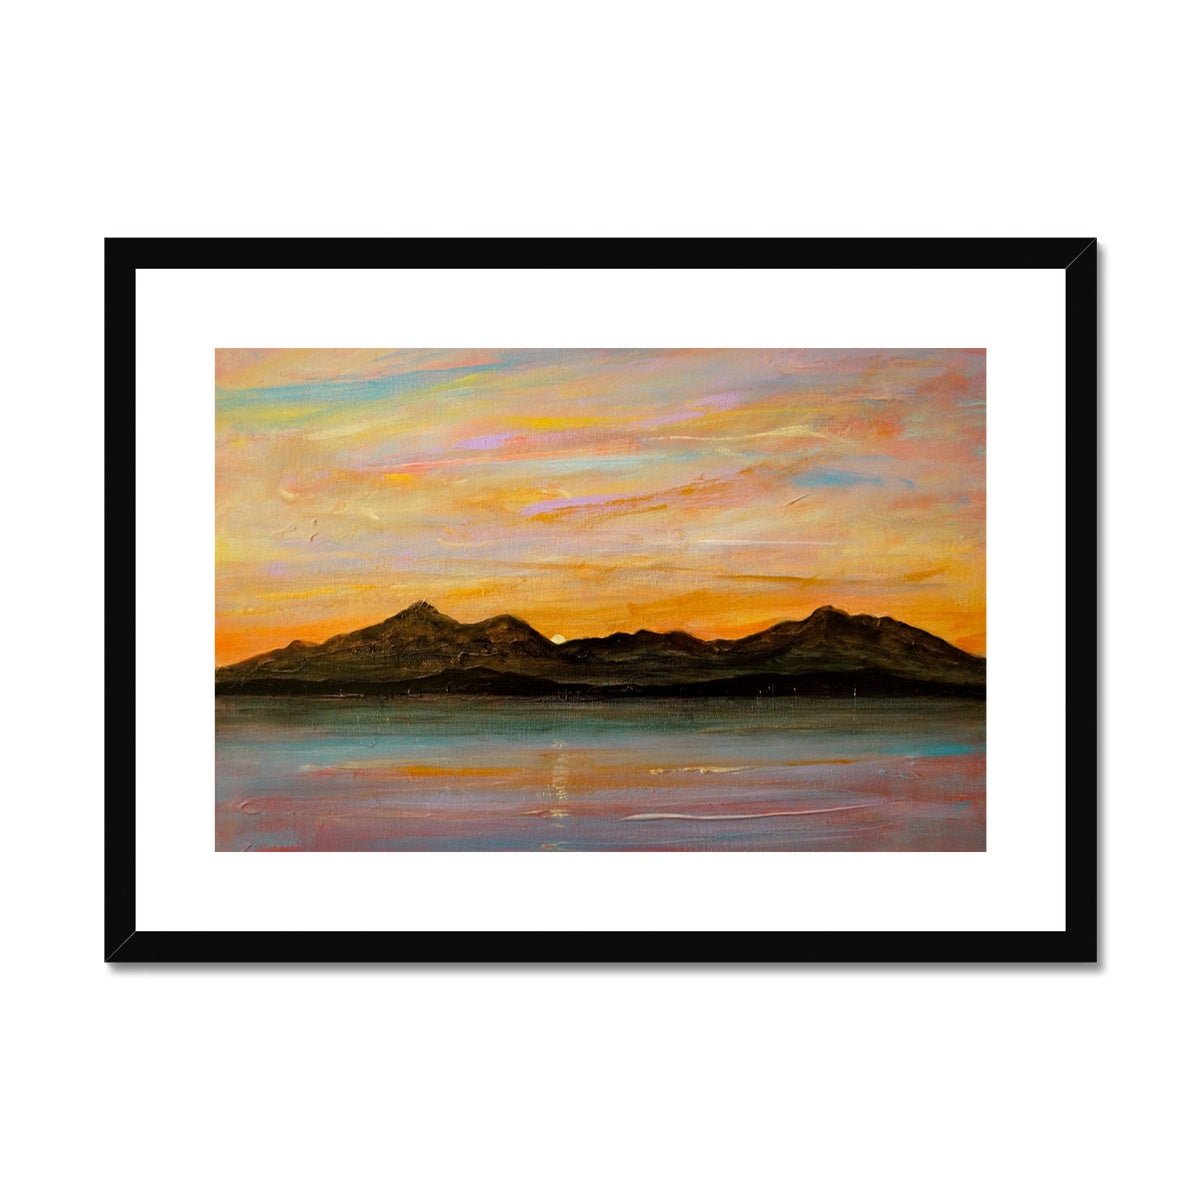 The Sleeping Warrior Arran Painting | Framed & Mounted Prints From Scotland-Framed & Mounted Prints-Arran Art Gallery-A2 Landscape-Black Frame-Paintings, Prints, Homeware, Art Gifts From Scotland By Scottish Artist Kevin Hunter